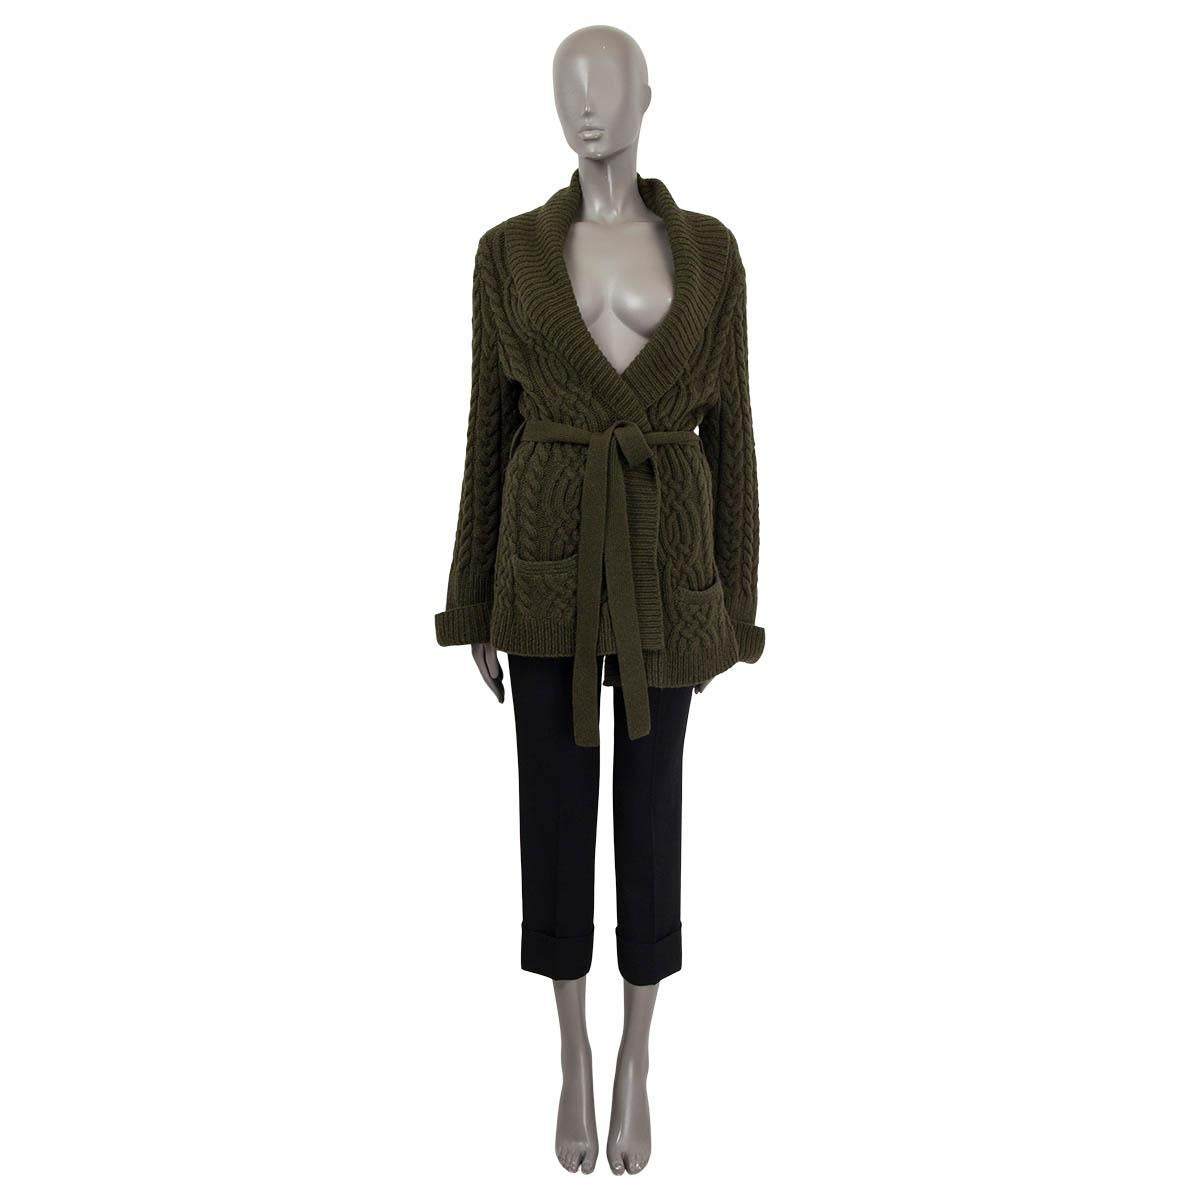 100% authentic Ralph Lauren cardigan in olive cashmere (55%) and wool (45%). Features a cable-knit elements, two pockets and a self-tie belt. Unlined. Has been worn and is in excellent condition. 

Measurements
Tag Size	XL
Size	XL
Shoulder